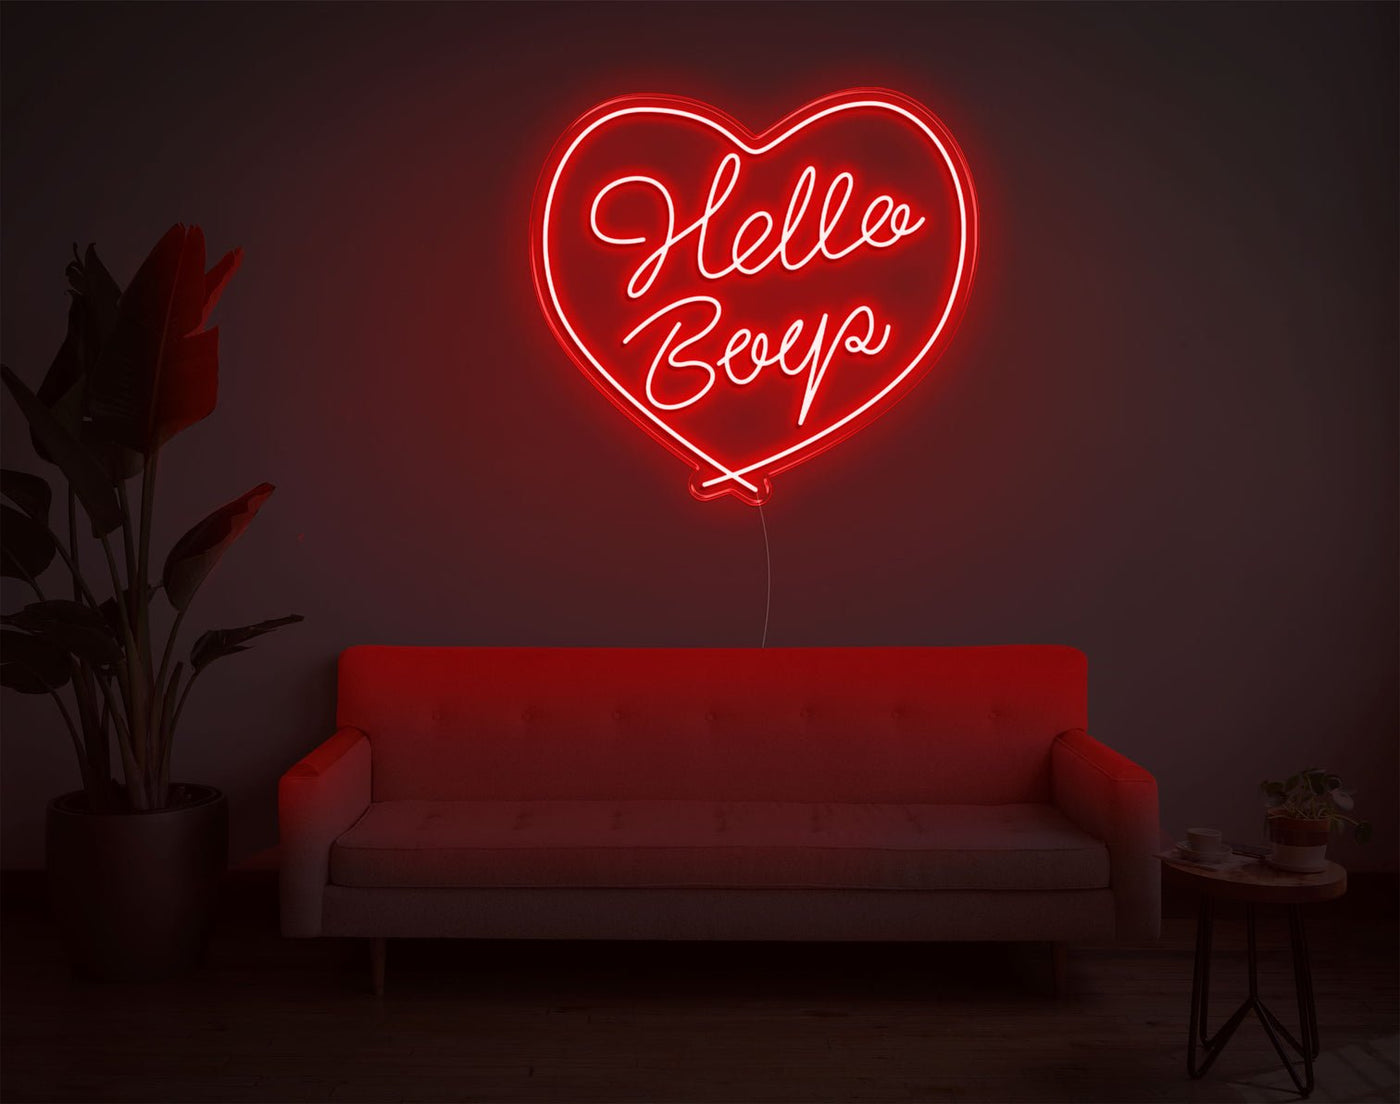 Hello Boys LED Neon Sign - 26inch x 28inchRed